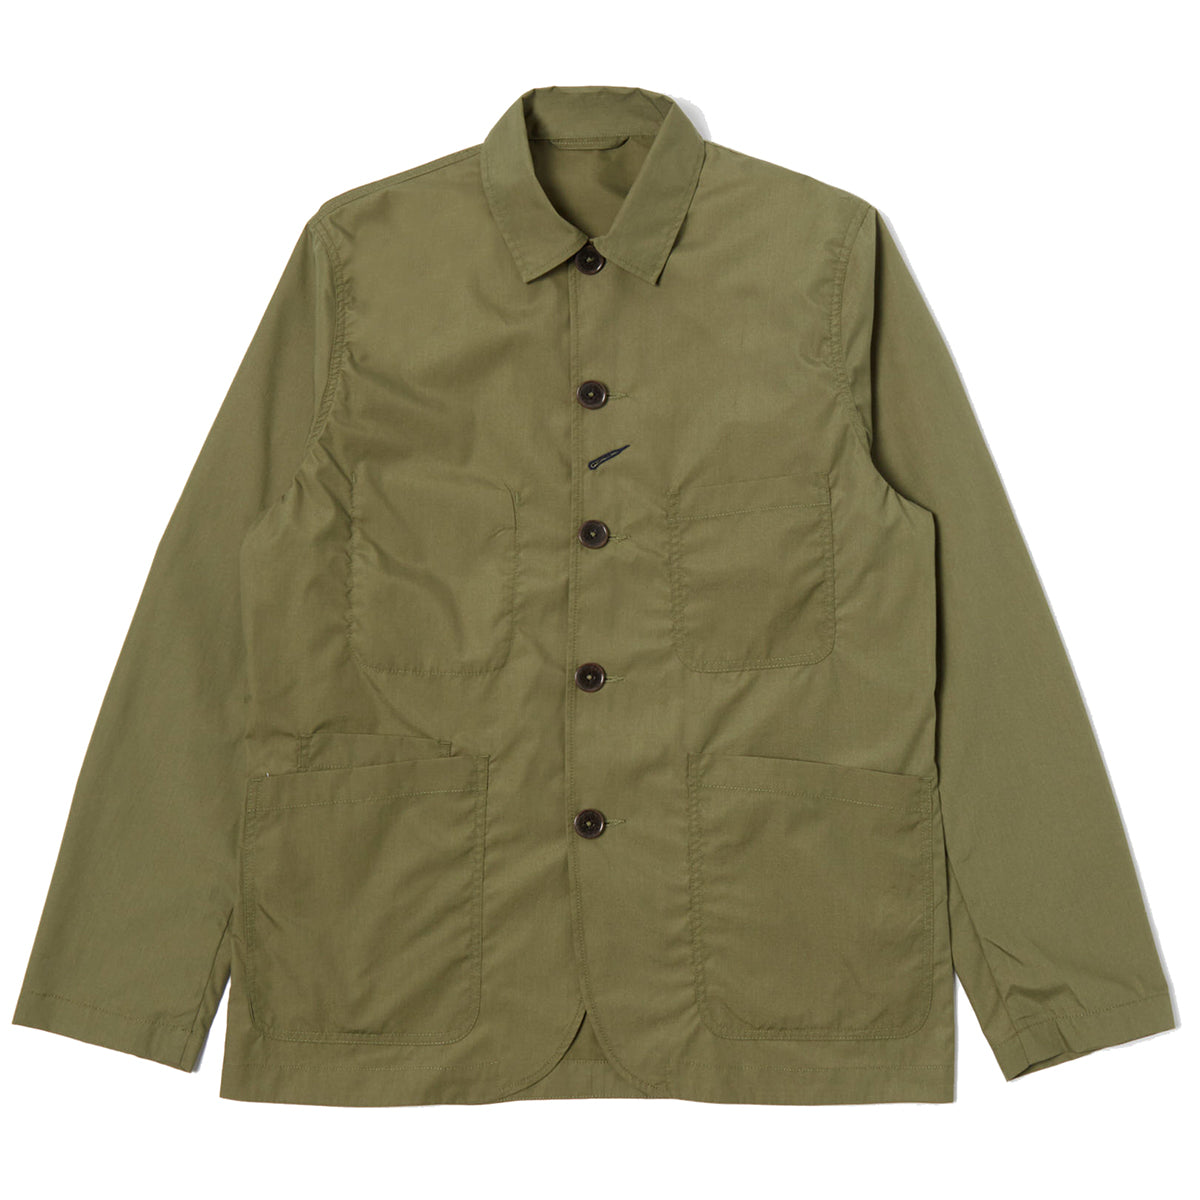 Bakers Chore Jacket - Olive Recycled Poly Tech